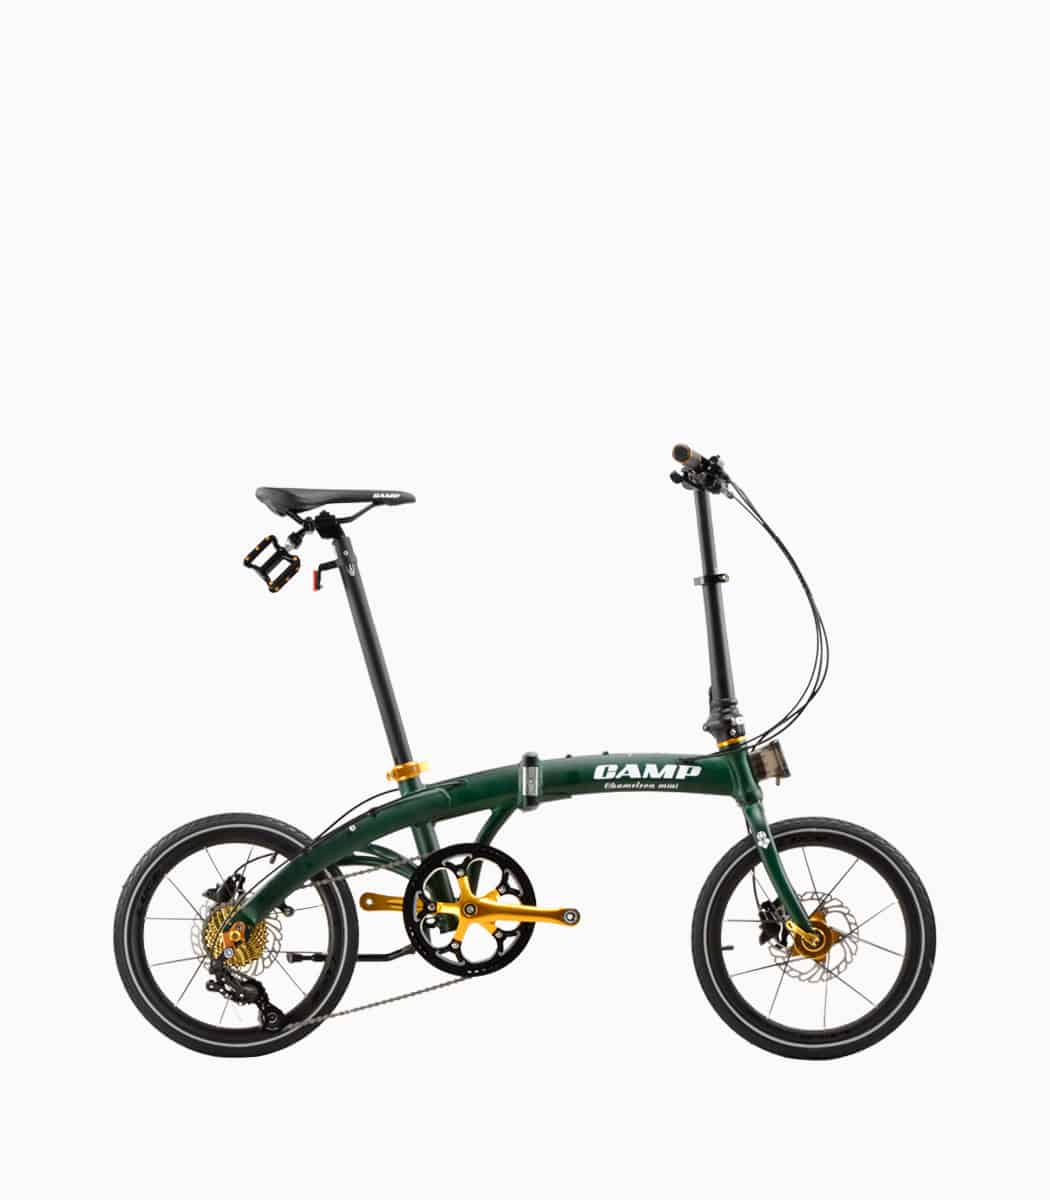 CAMP CHAMELEON Mini (MATT GREEN) foldable bicycle with reflective tyres right